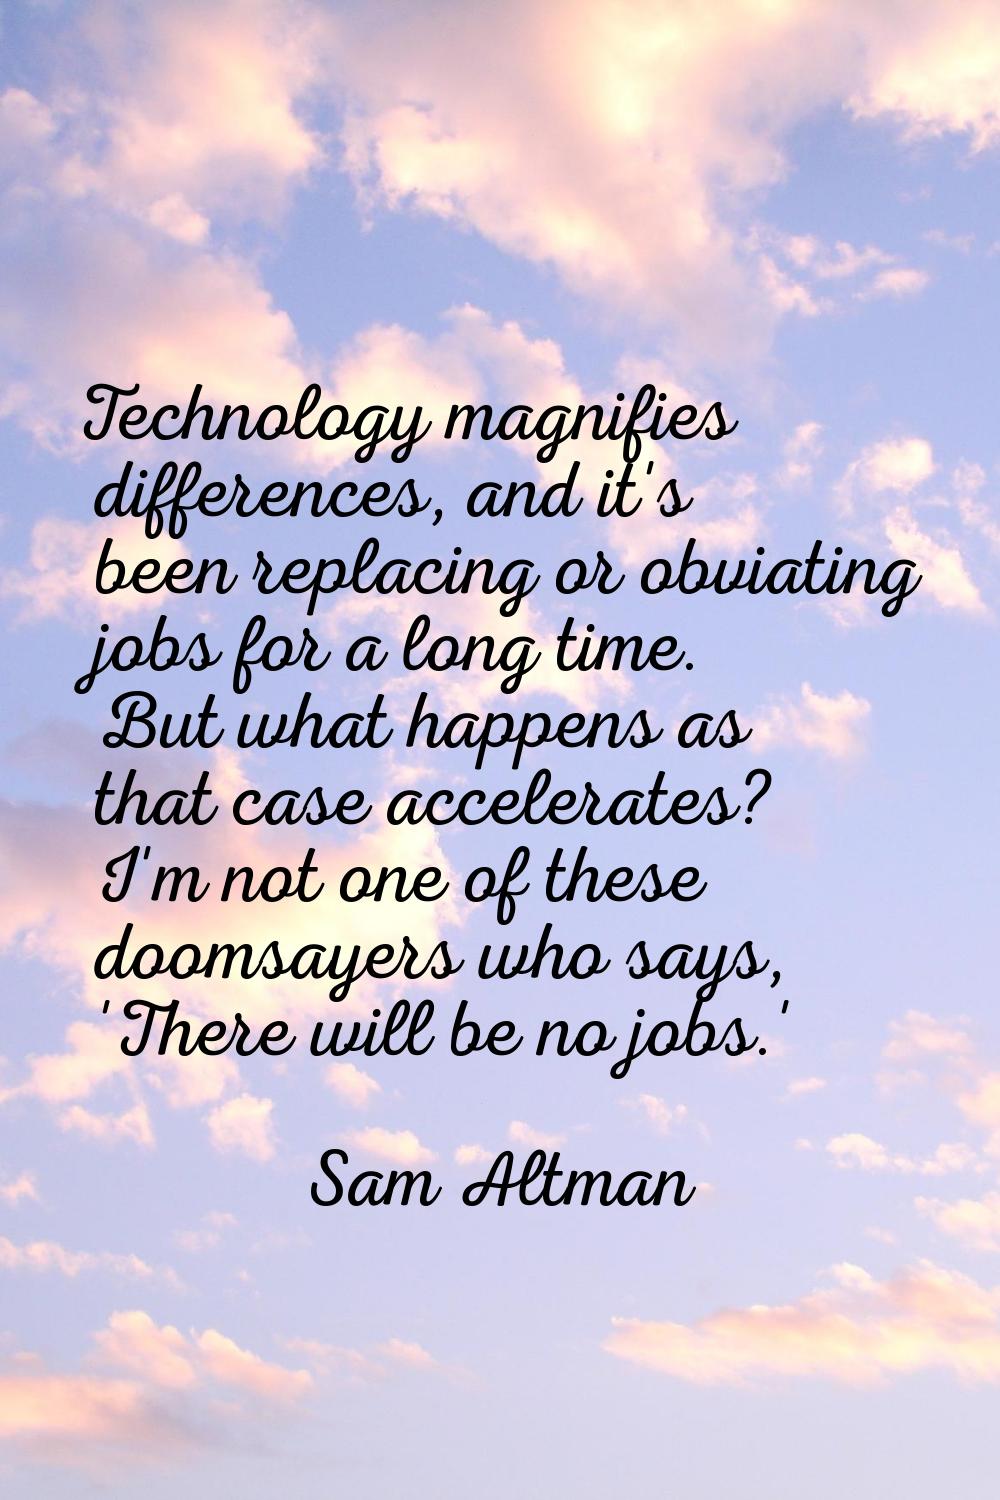 Technology magnifies differences, and it's been replacing or obviating jobs for a long time. But wh